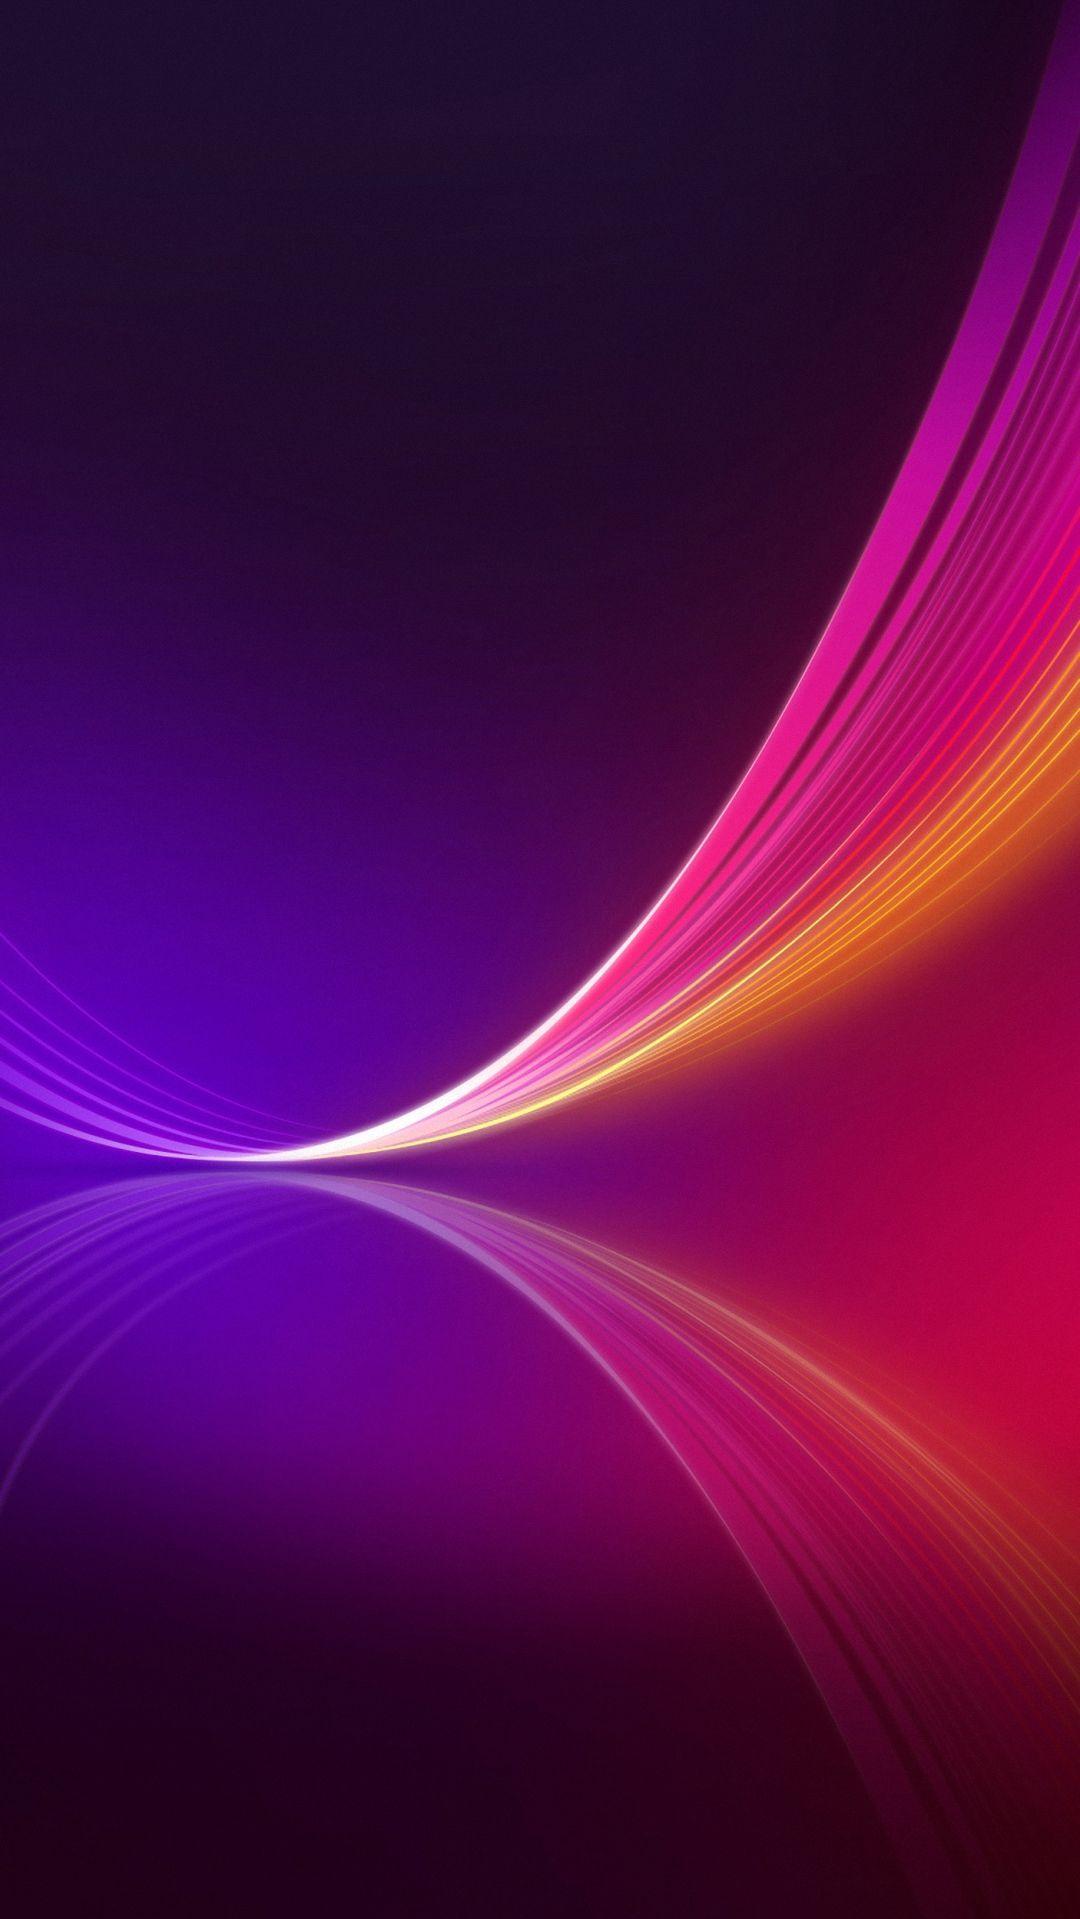 38] 2020 New Mobile Hd Wallpapers